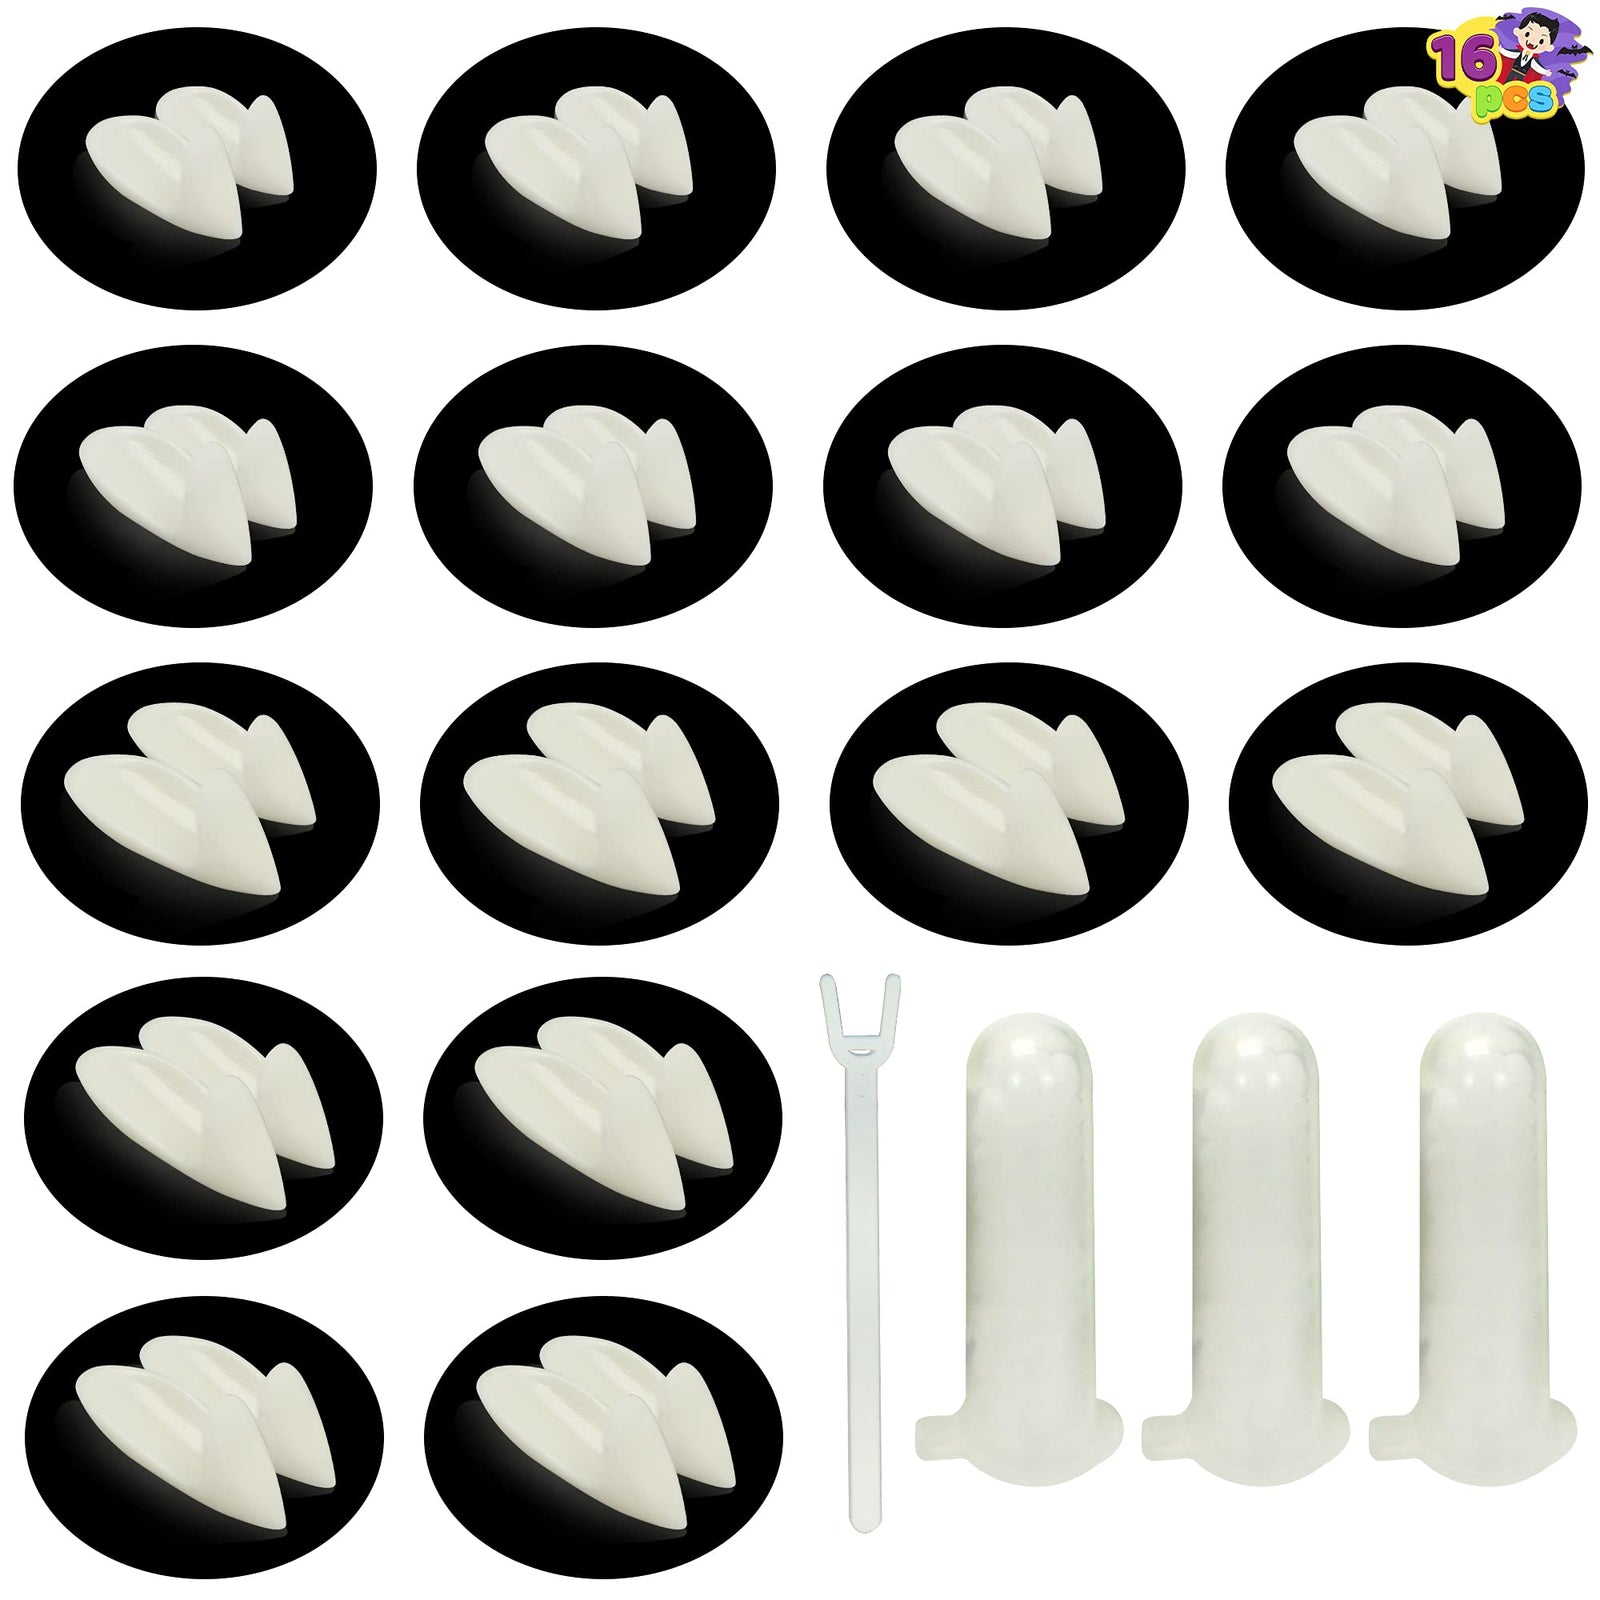 16 Pairs Vampire Fangs fake Teeth 4 sizes for Halloween Cosplay kids and adults Prop Decoration Vampire Tooth White Horror 13mm, 15mm, 17mm, 19mm False Teeth - 4 Sizes Dress Up Accessories